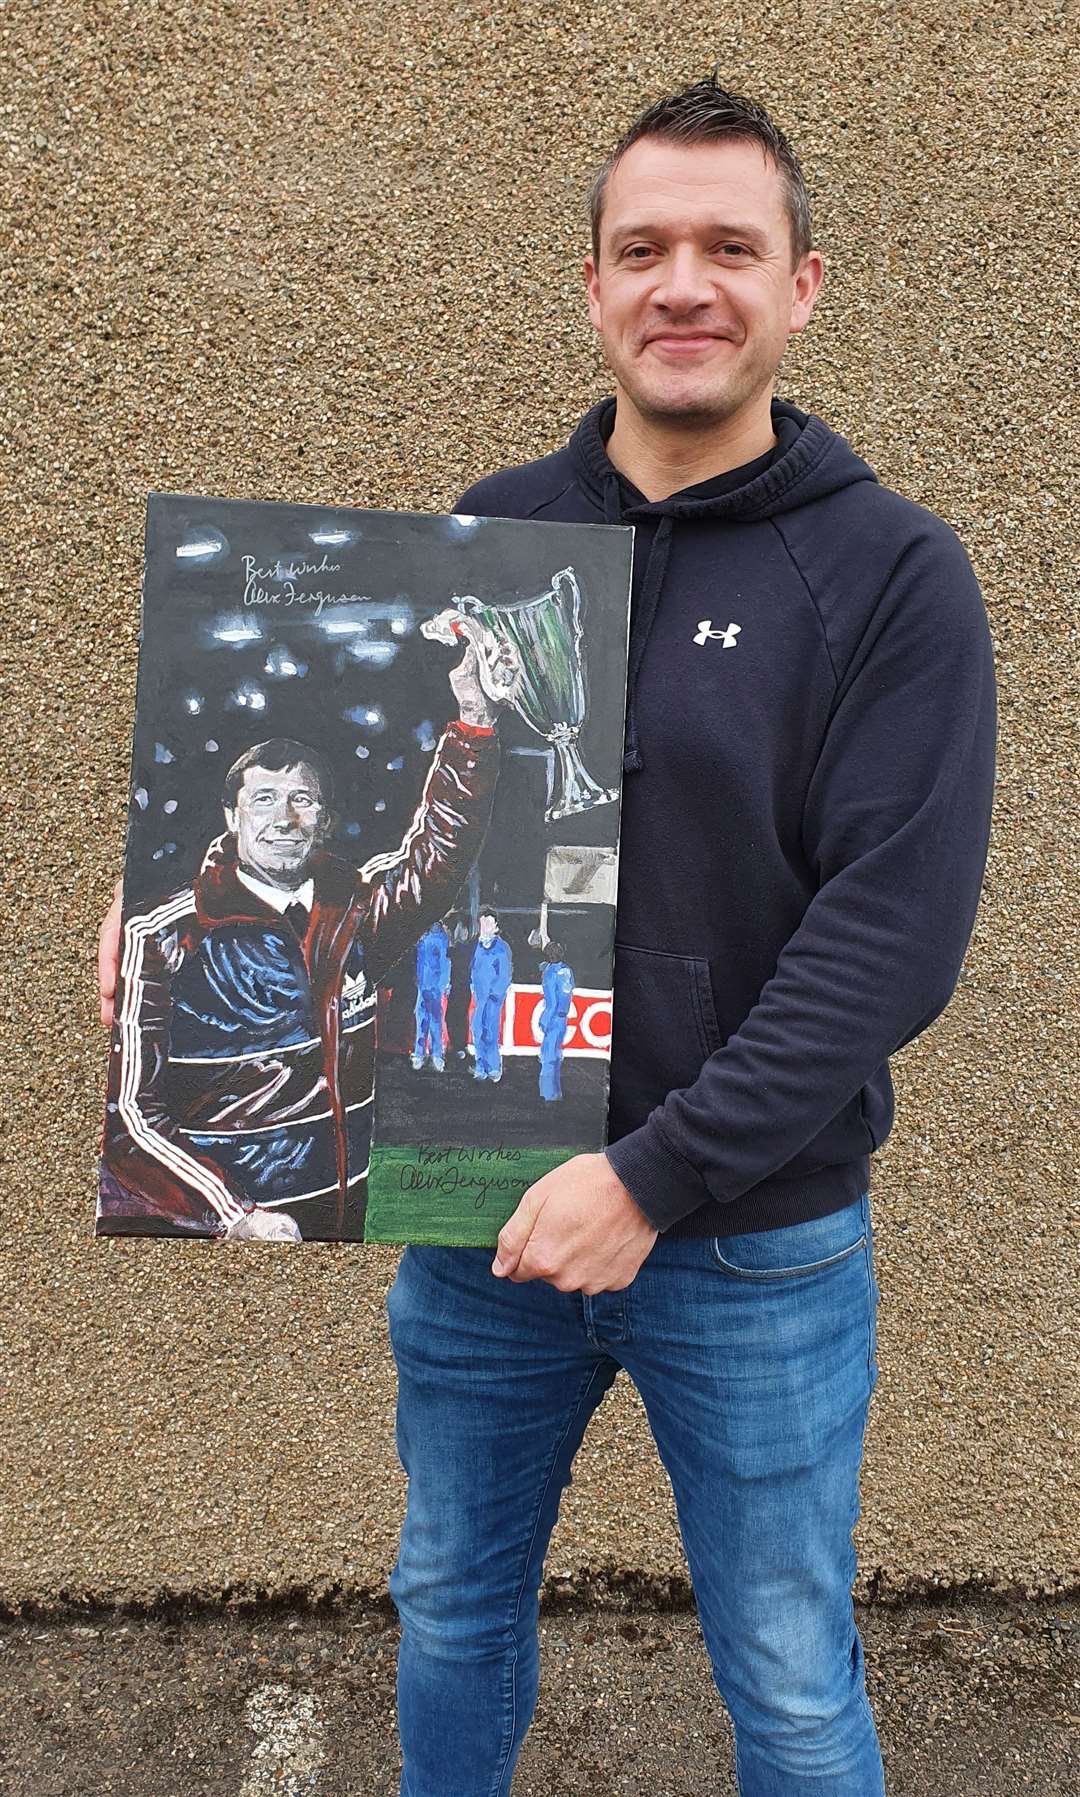 Davie Greig with his painting of Sir Alex Ferguson, signed by the football legend. Davie's football portraits have raised thousands of pounds for charities.